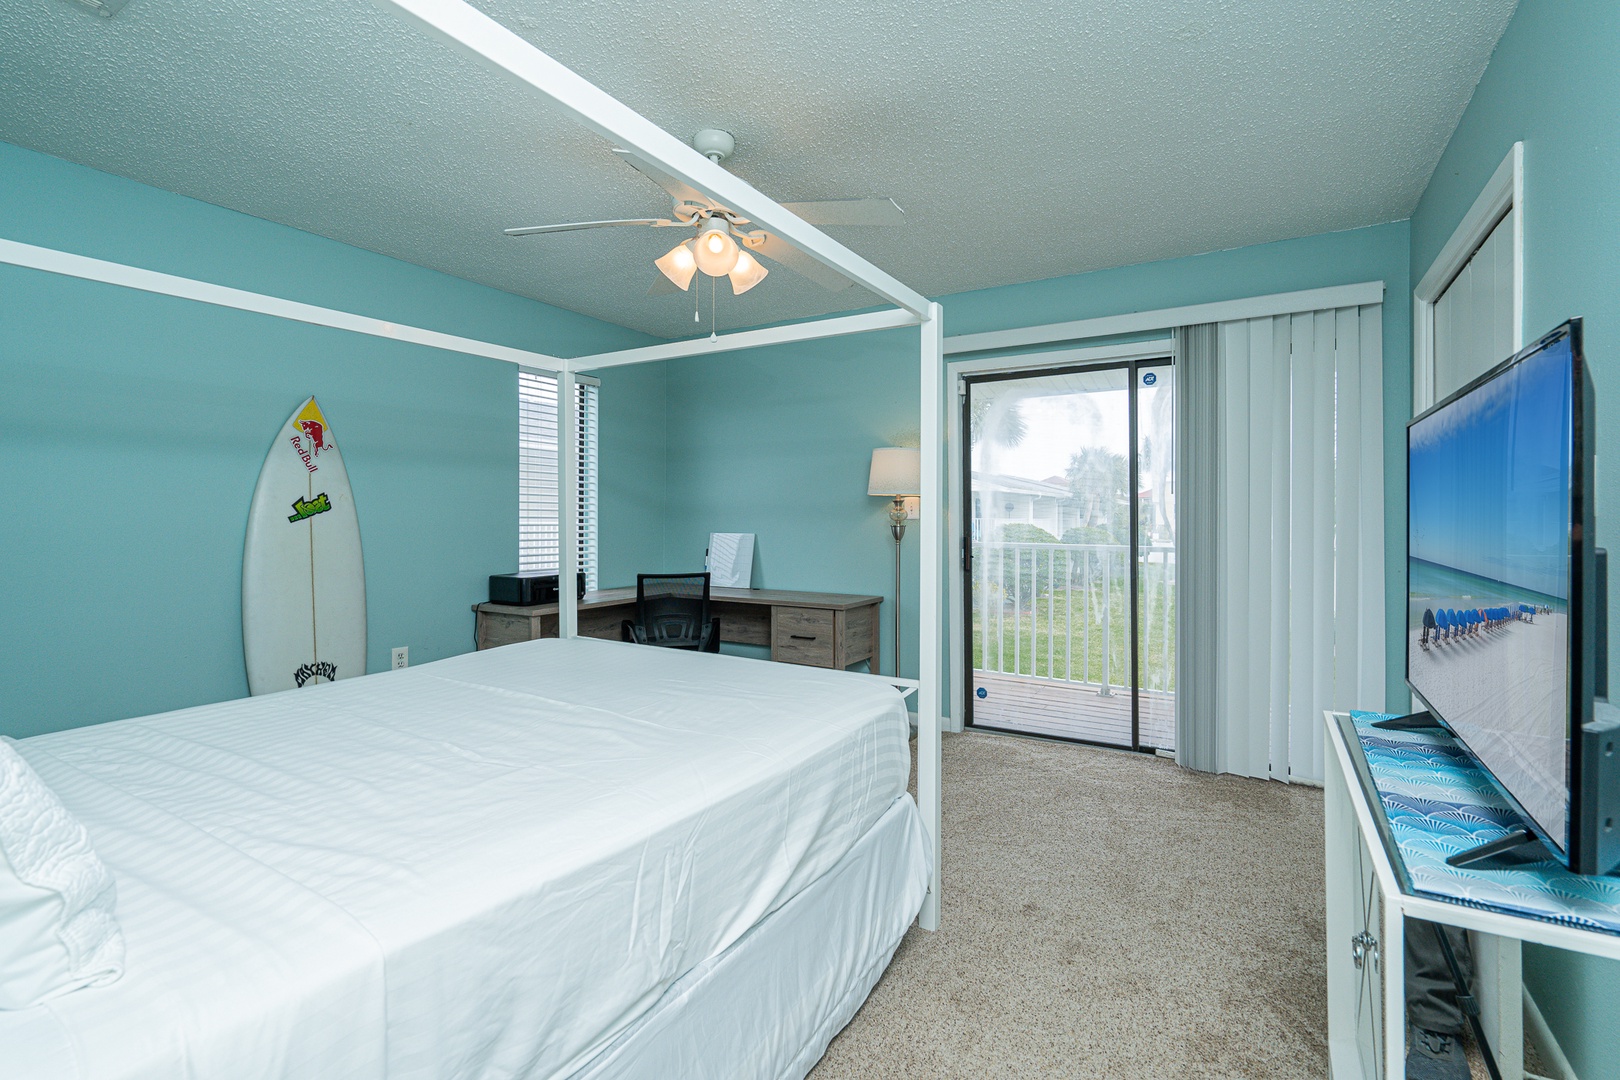 The king suite boasts a private ensuite, desk workspace, Smart TV, & balcony